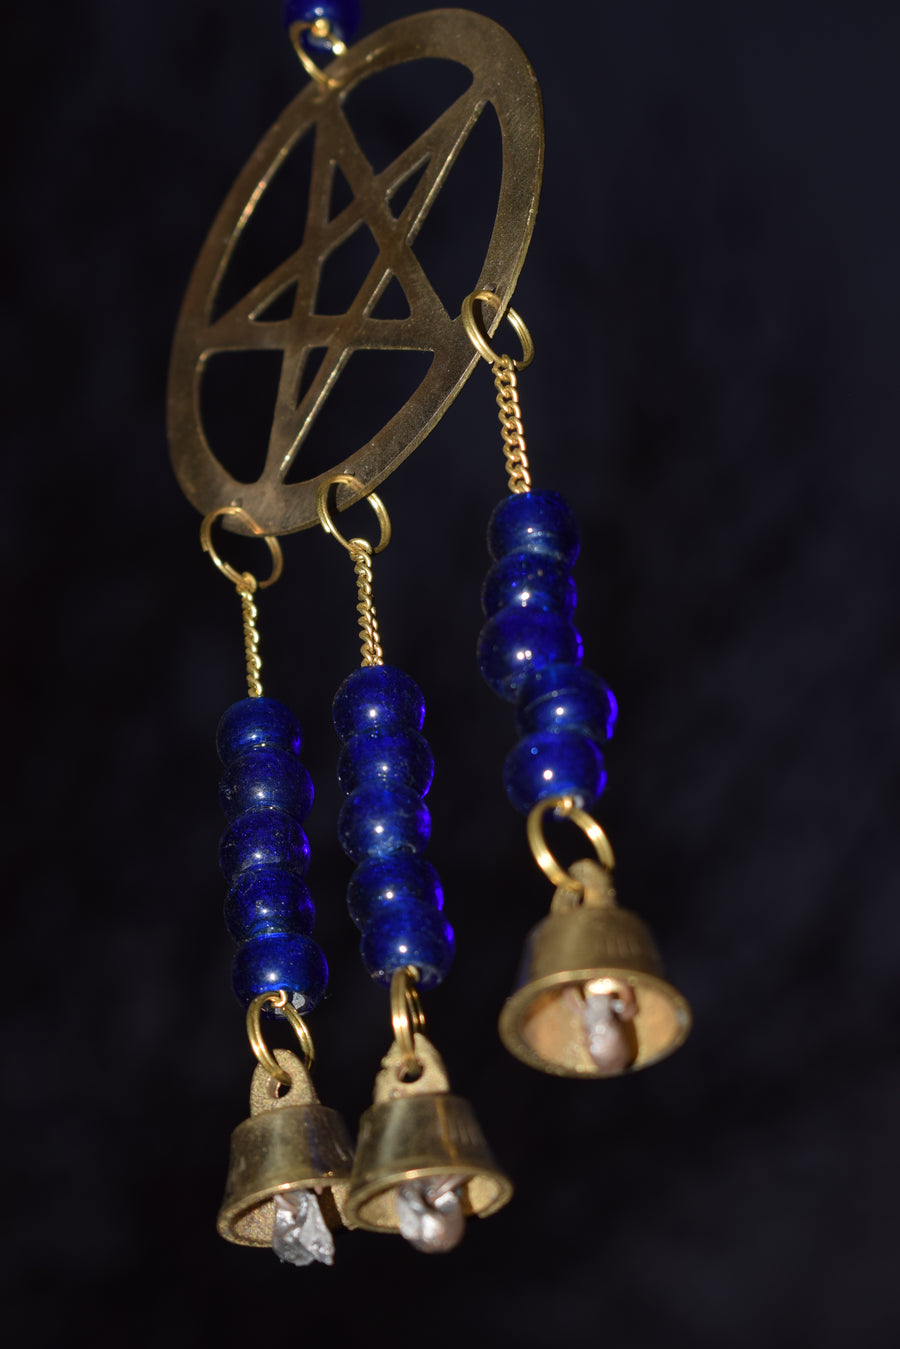 A bronze pentagram metal wind chime with royal blue beads and bells hanging in the garden in the breeze